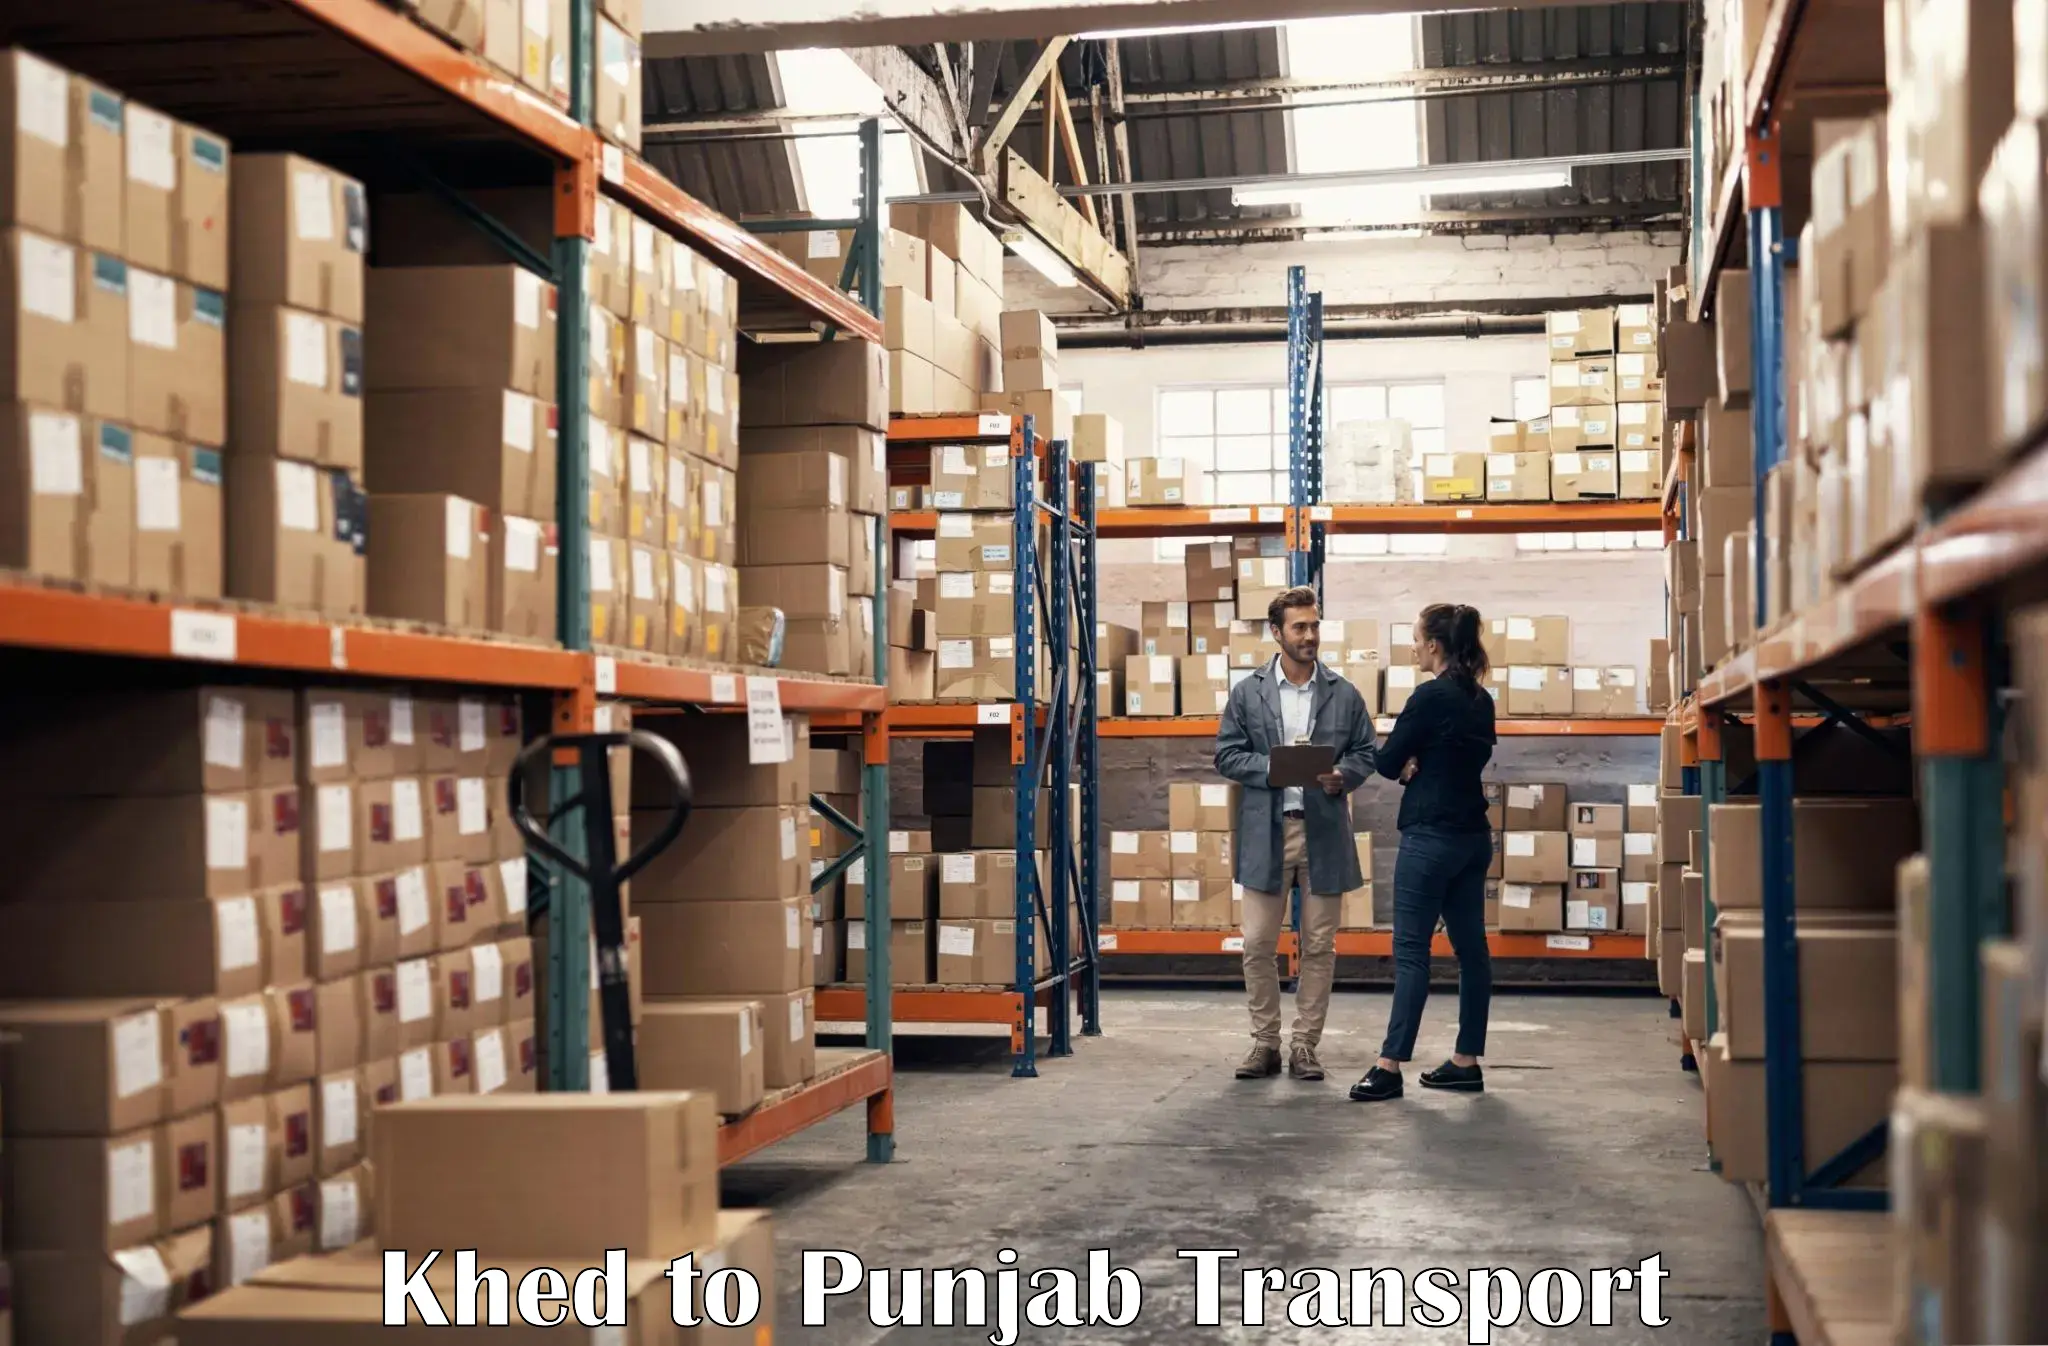 Pick up transport service in Khed to Ludhiana